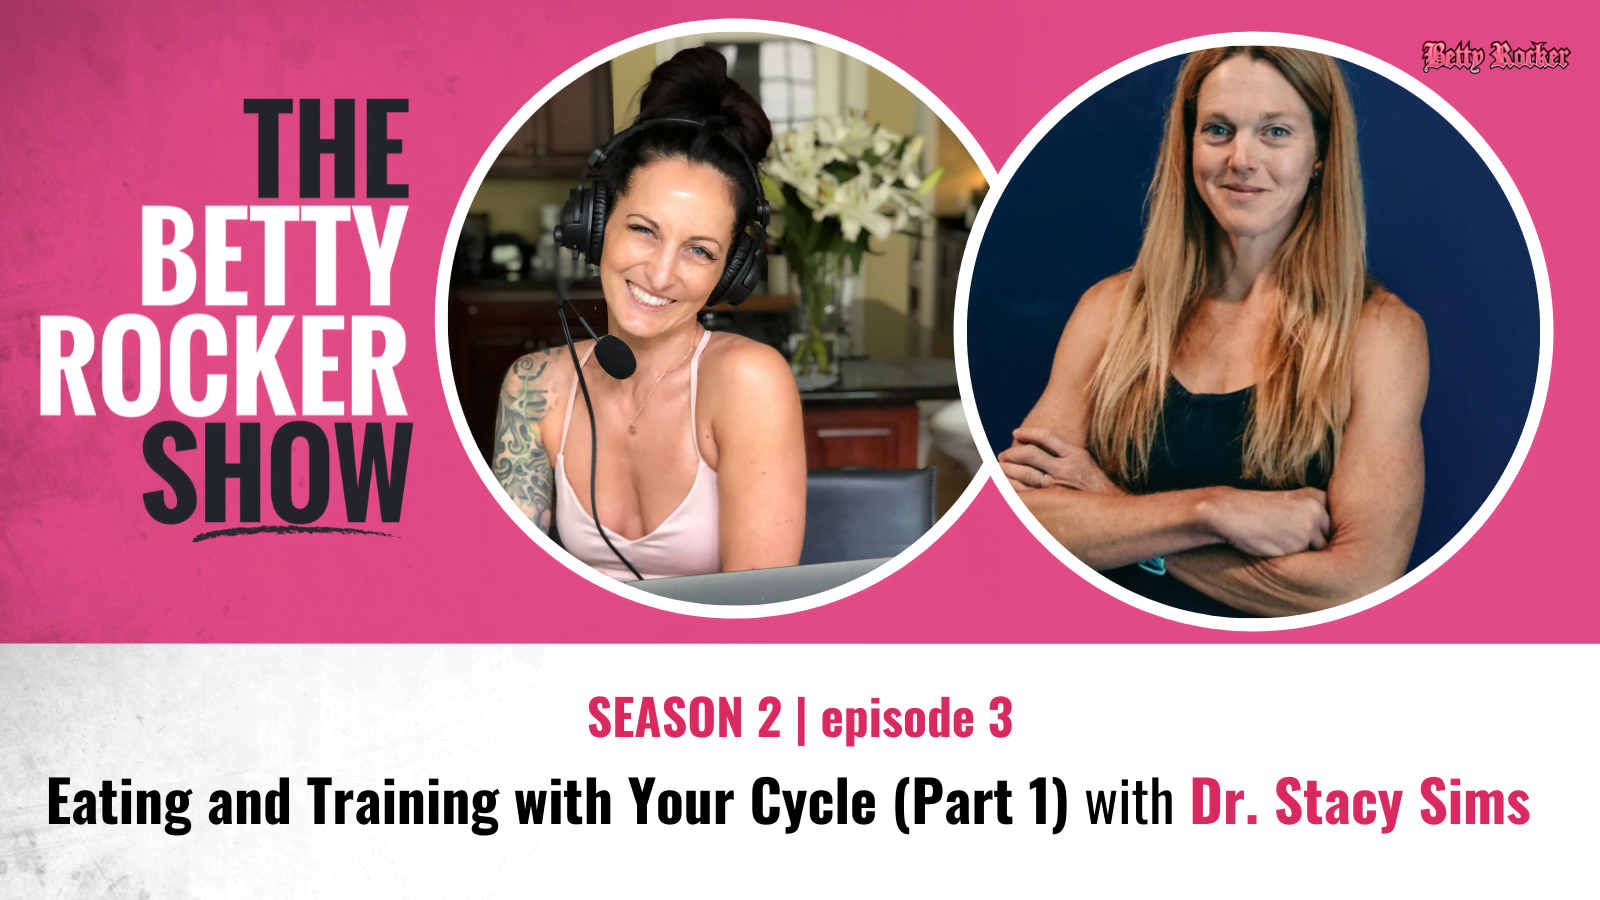 S2 – 3: Eating and Training with Your Cycle (Part 1) with Dr. Stacy Sims